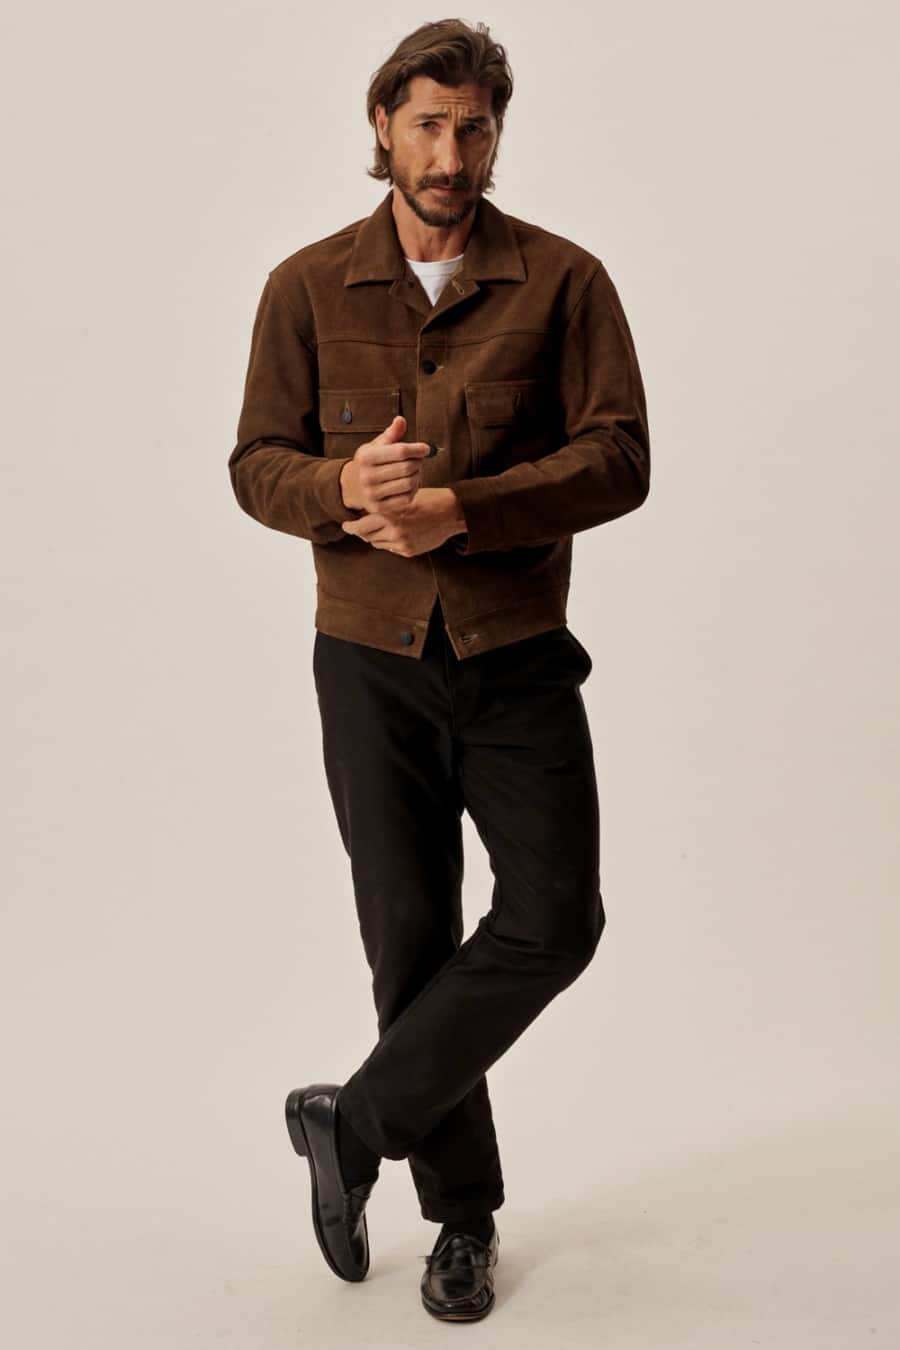 Men's black jeans, brown suede trucker jacket, white T-shirt and black leather penny loafers outfit